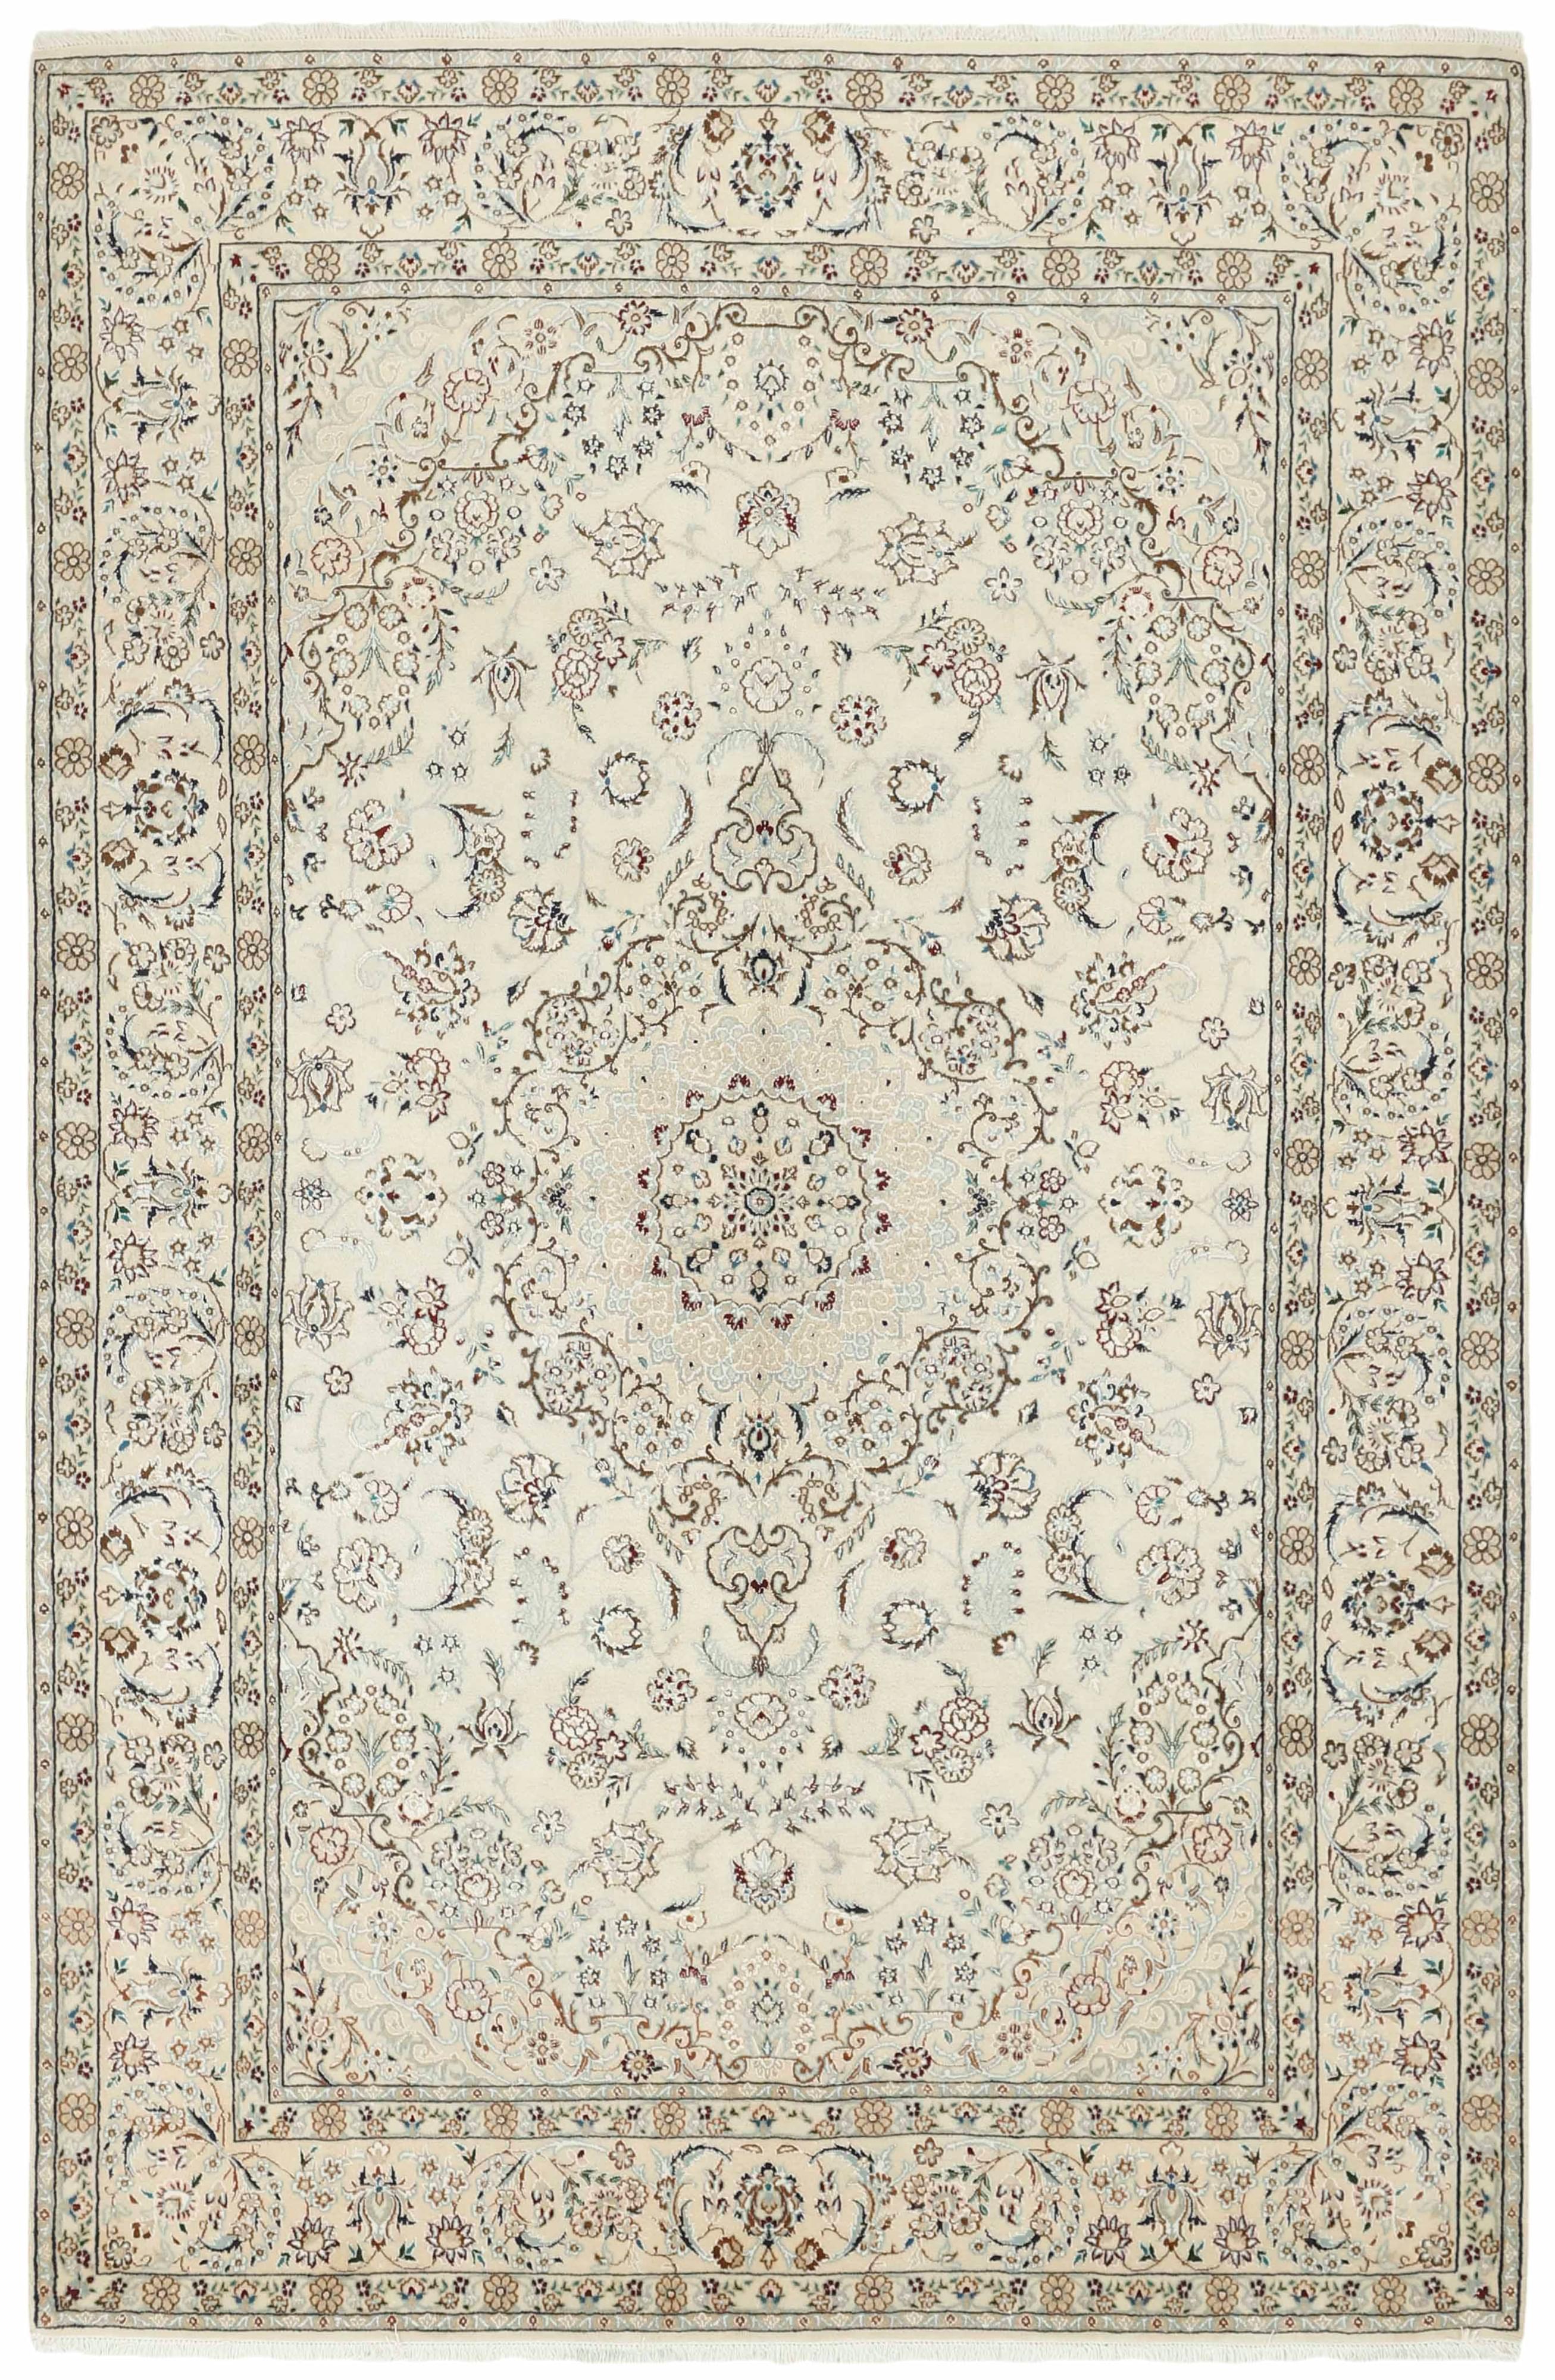 Authentic oriental rug with traditional floral design in cream